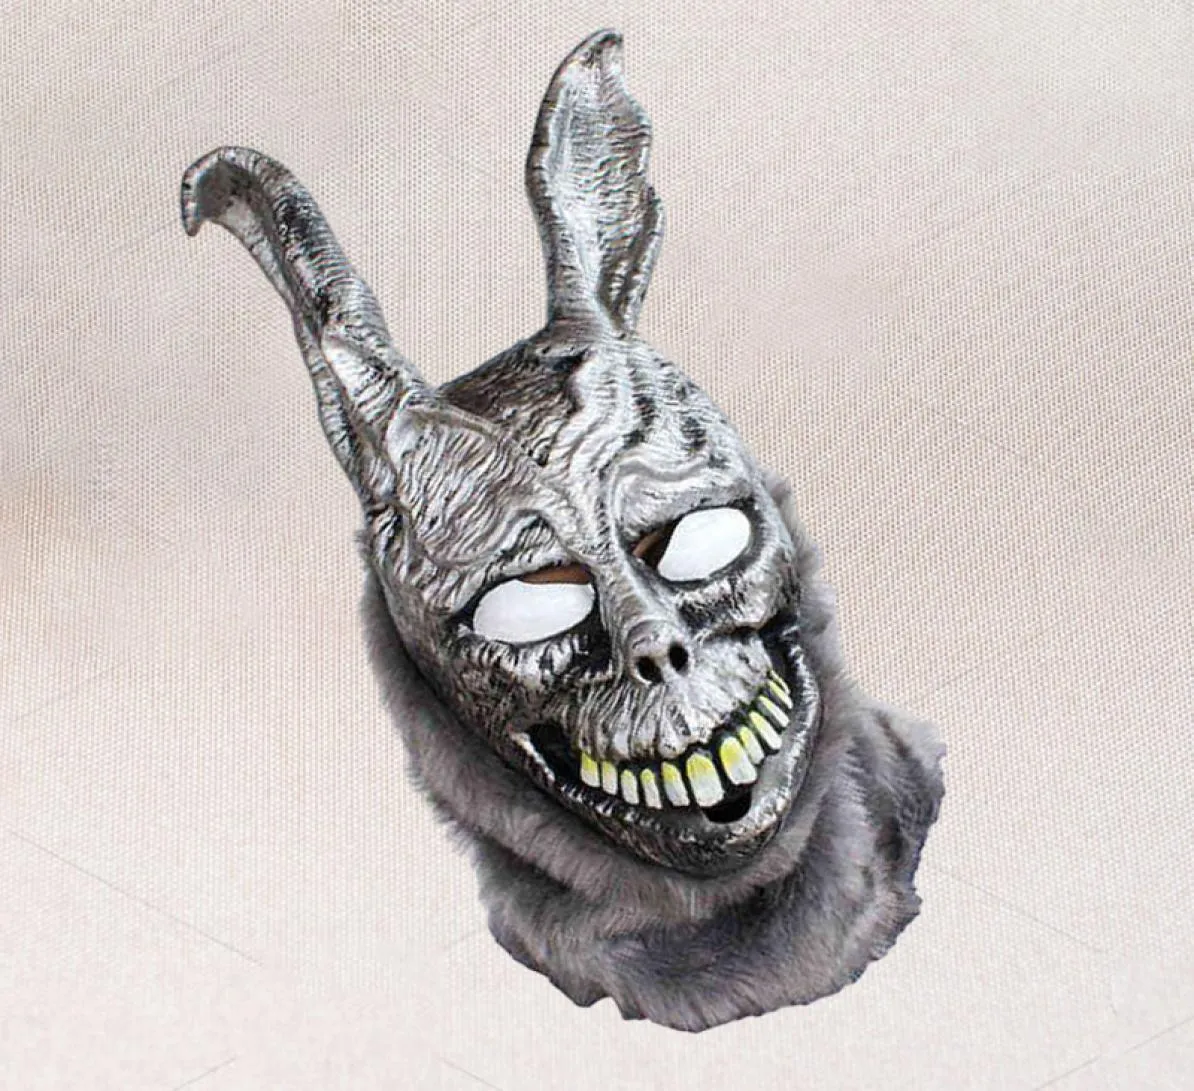 Film Donnie Darko Frank Evil Rabbit Mask Halloween Party Cosplay Props Latex Full Face Mask L2207116910818